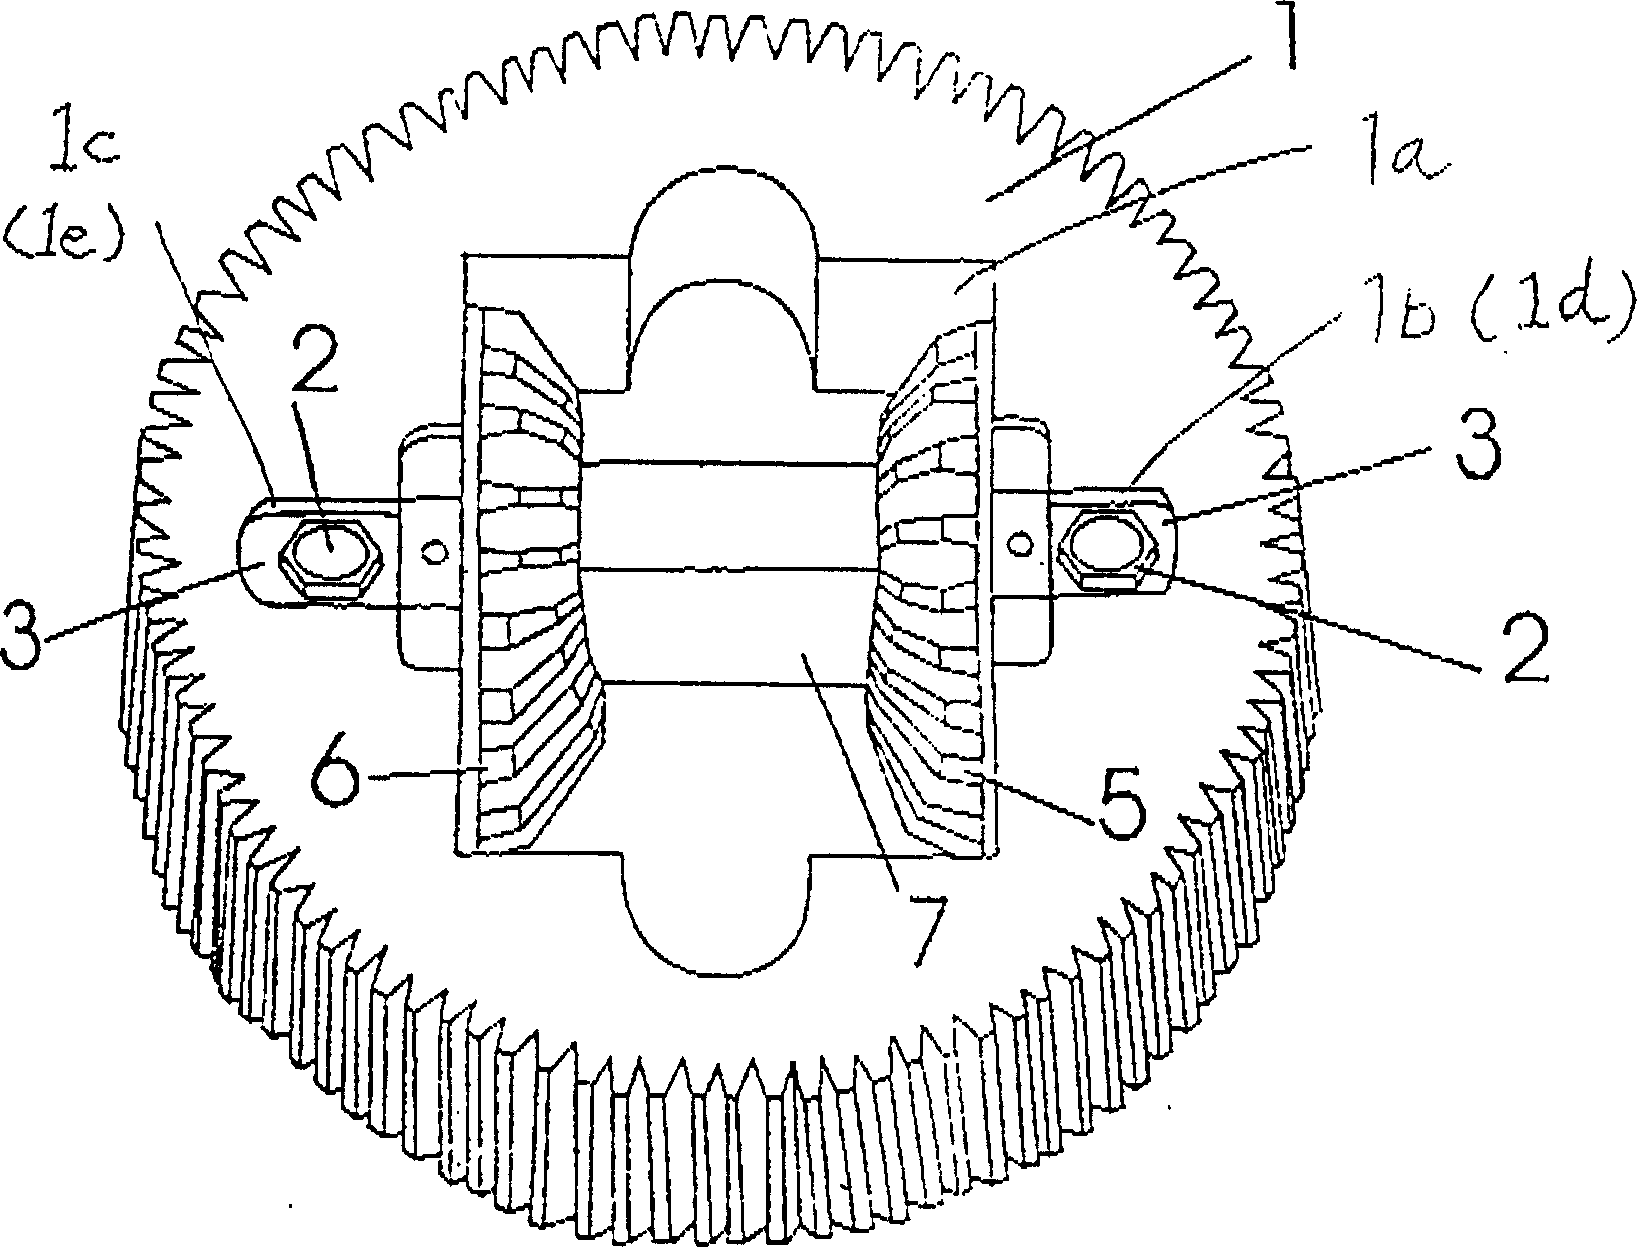 Manufacturing process of differential gear